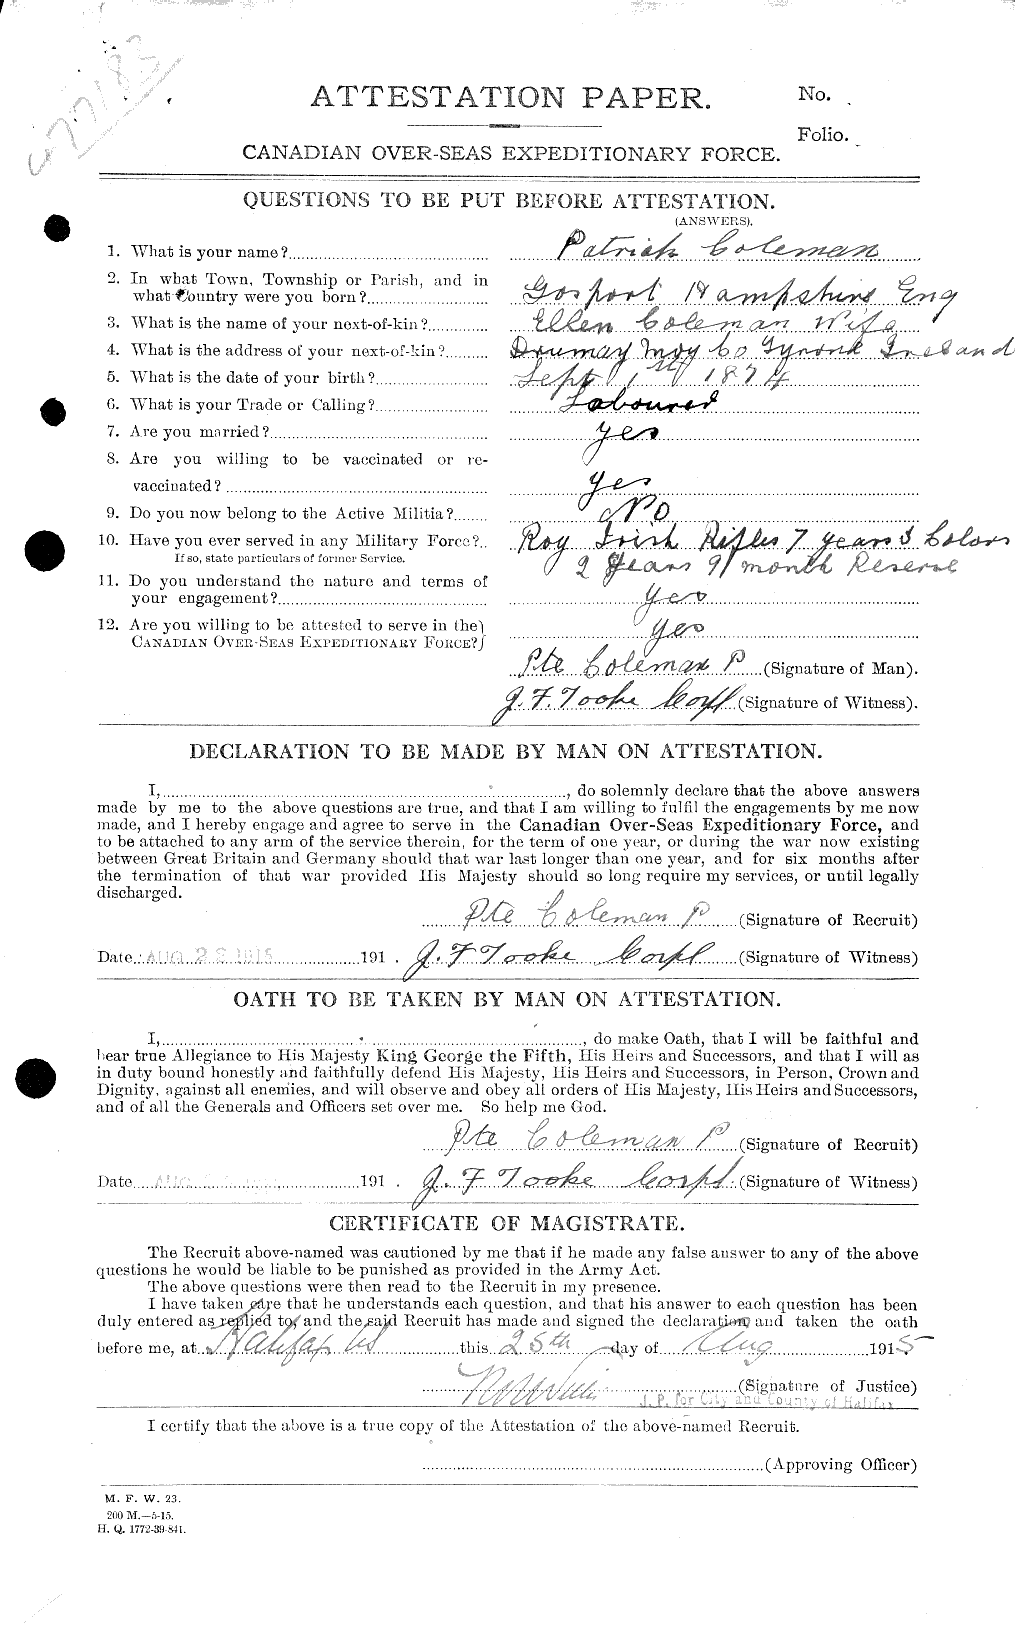 Personnel Records of the First World War - CEF 028250a